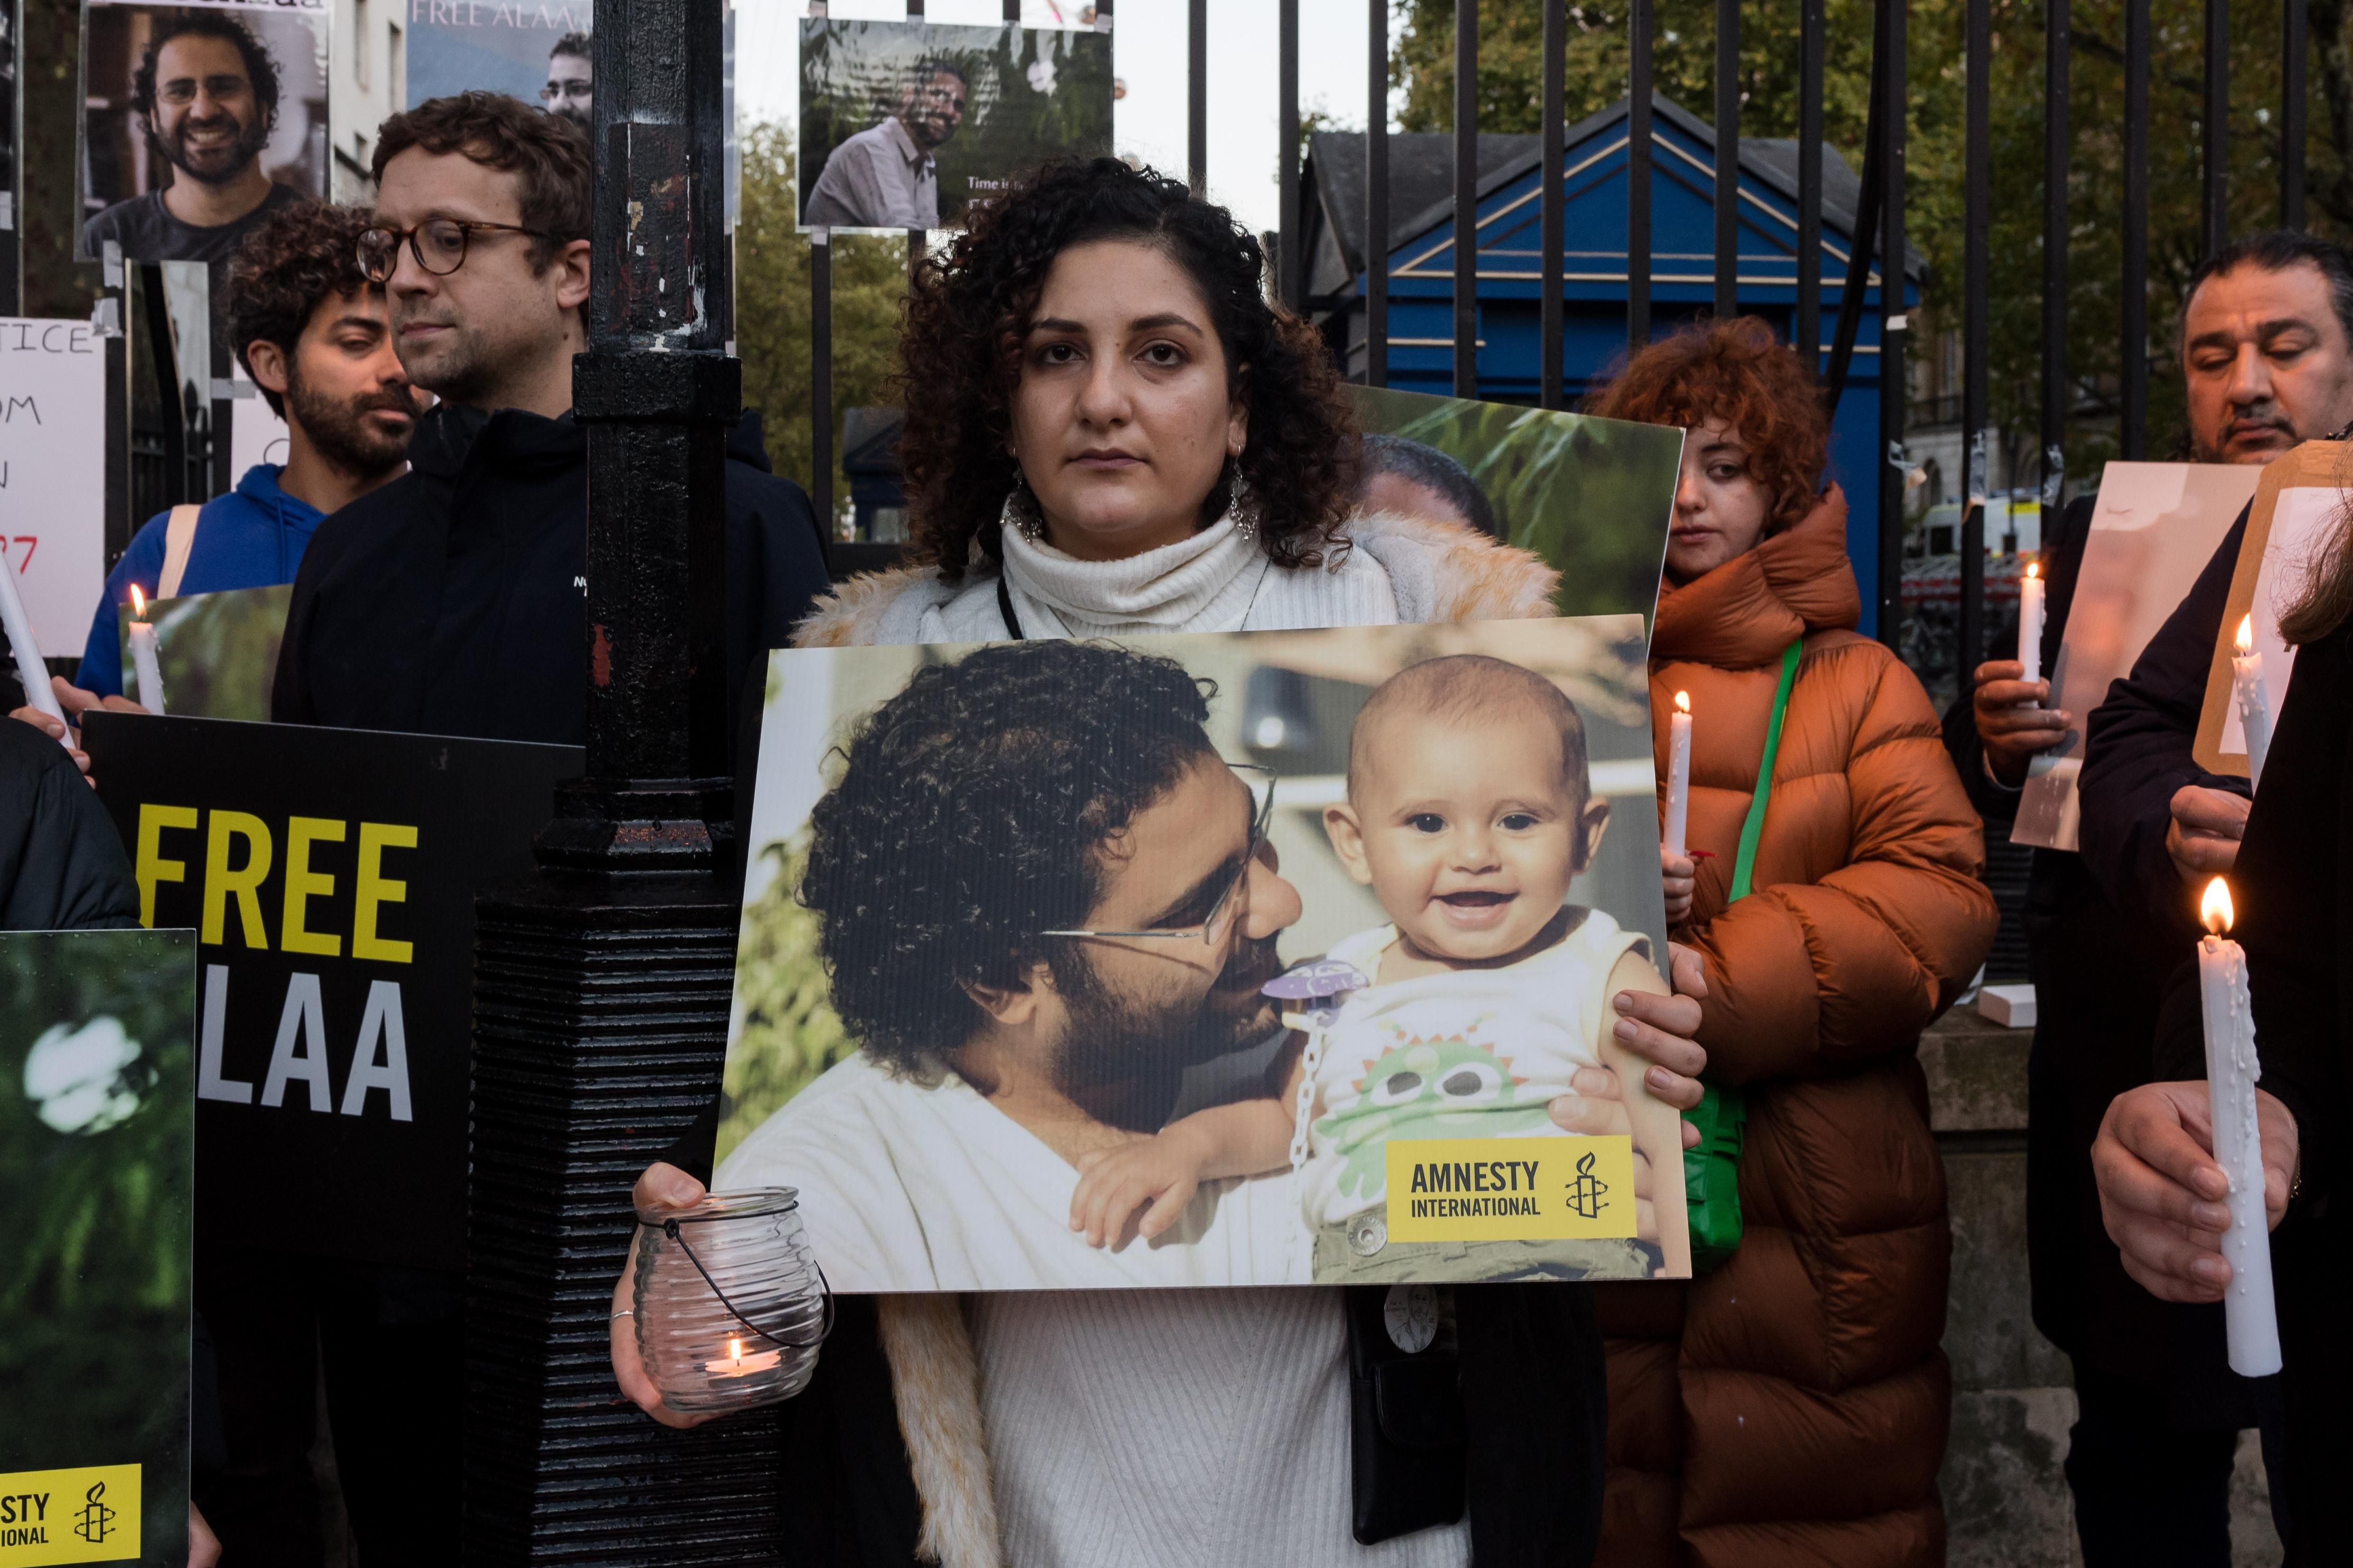 Mona Seif (C), sister of the jailed British-Egyptian human rights activist Alaa Abd el-Fattah, is joined by supporters during a vigil outside Downing Street to demonstrate concern for her brother